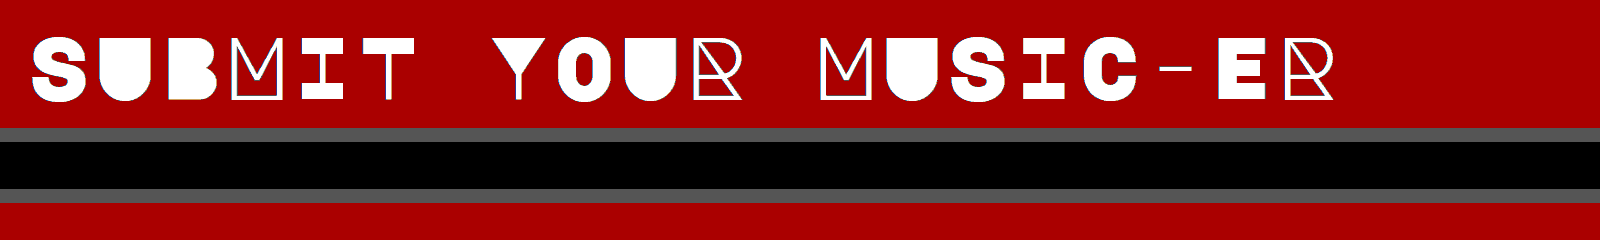 submit your music banner red and black banner